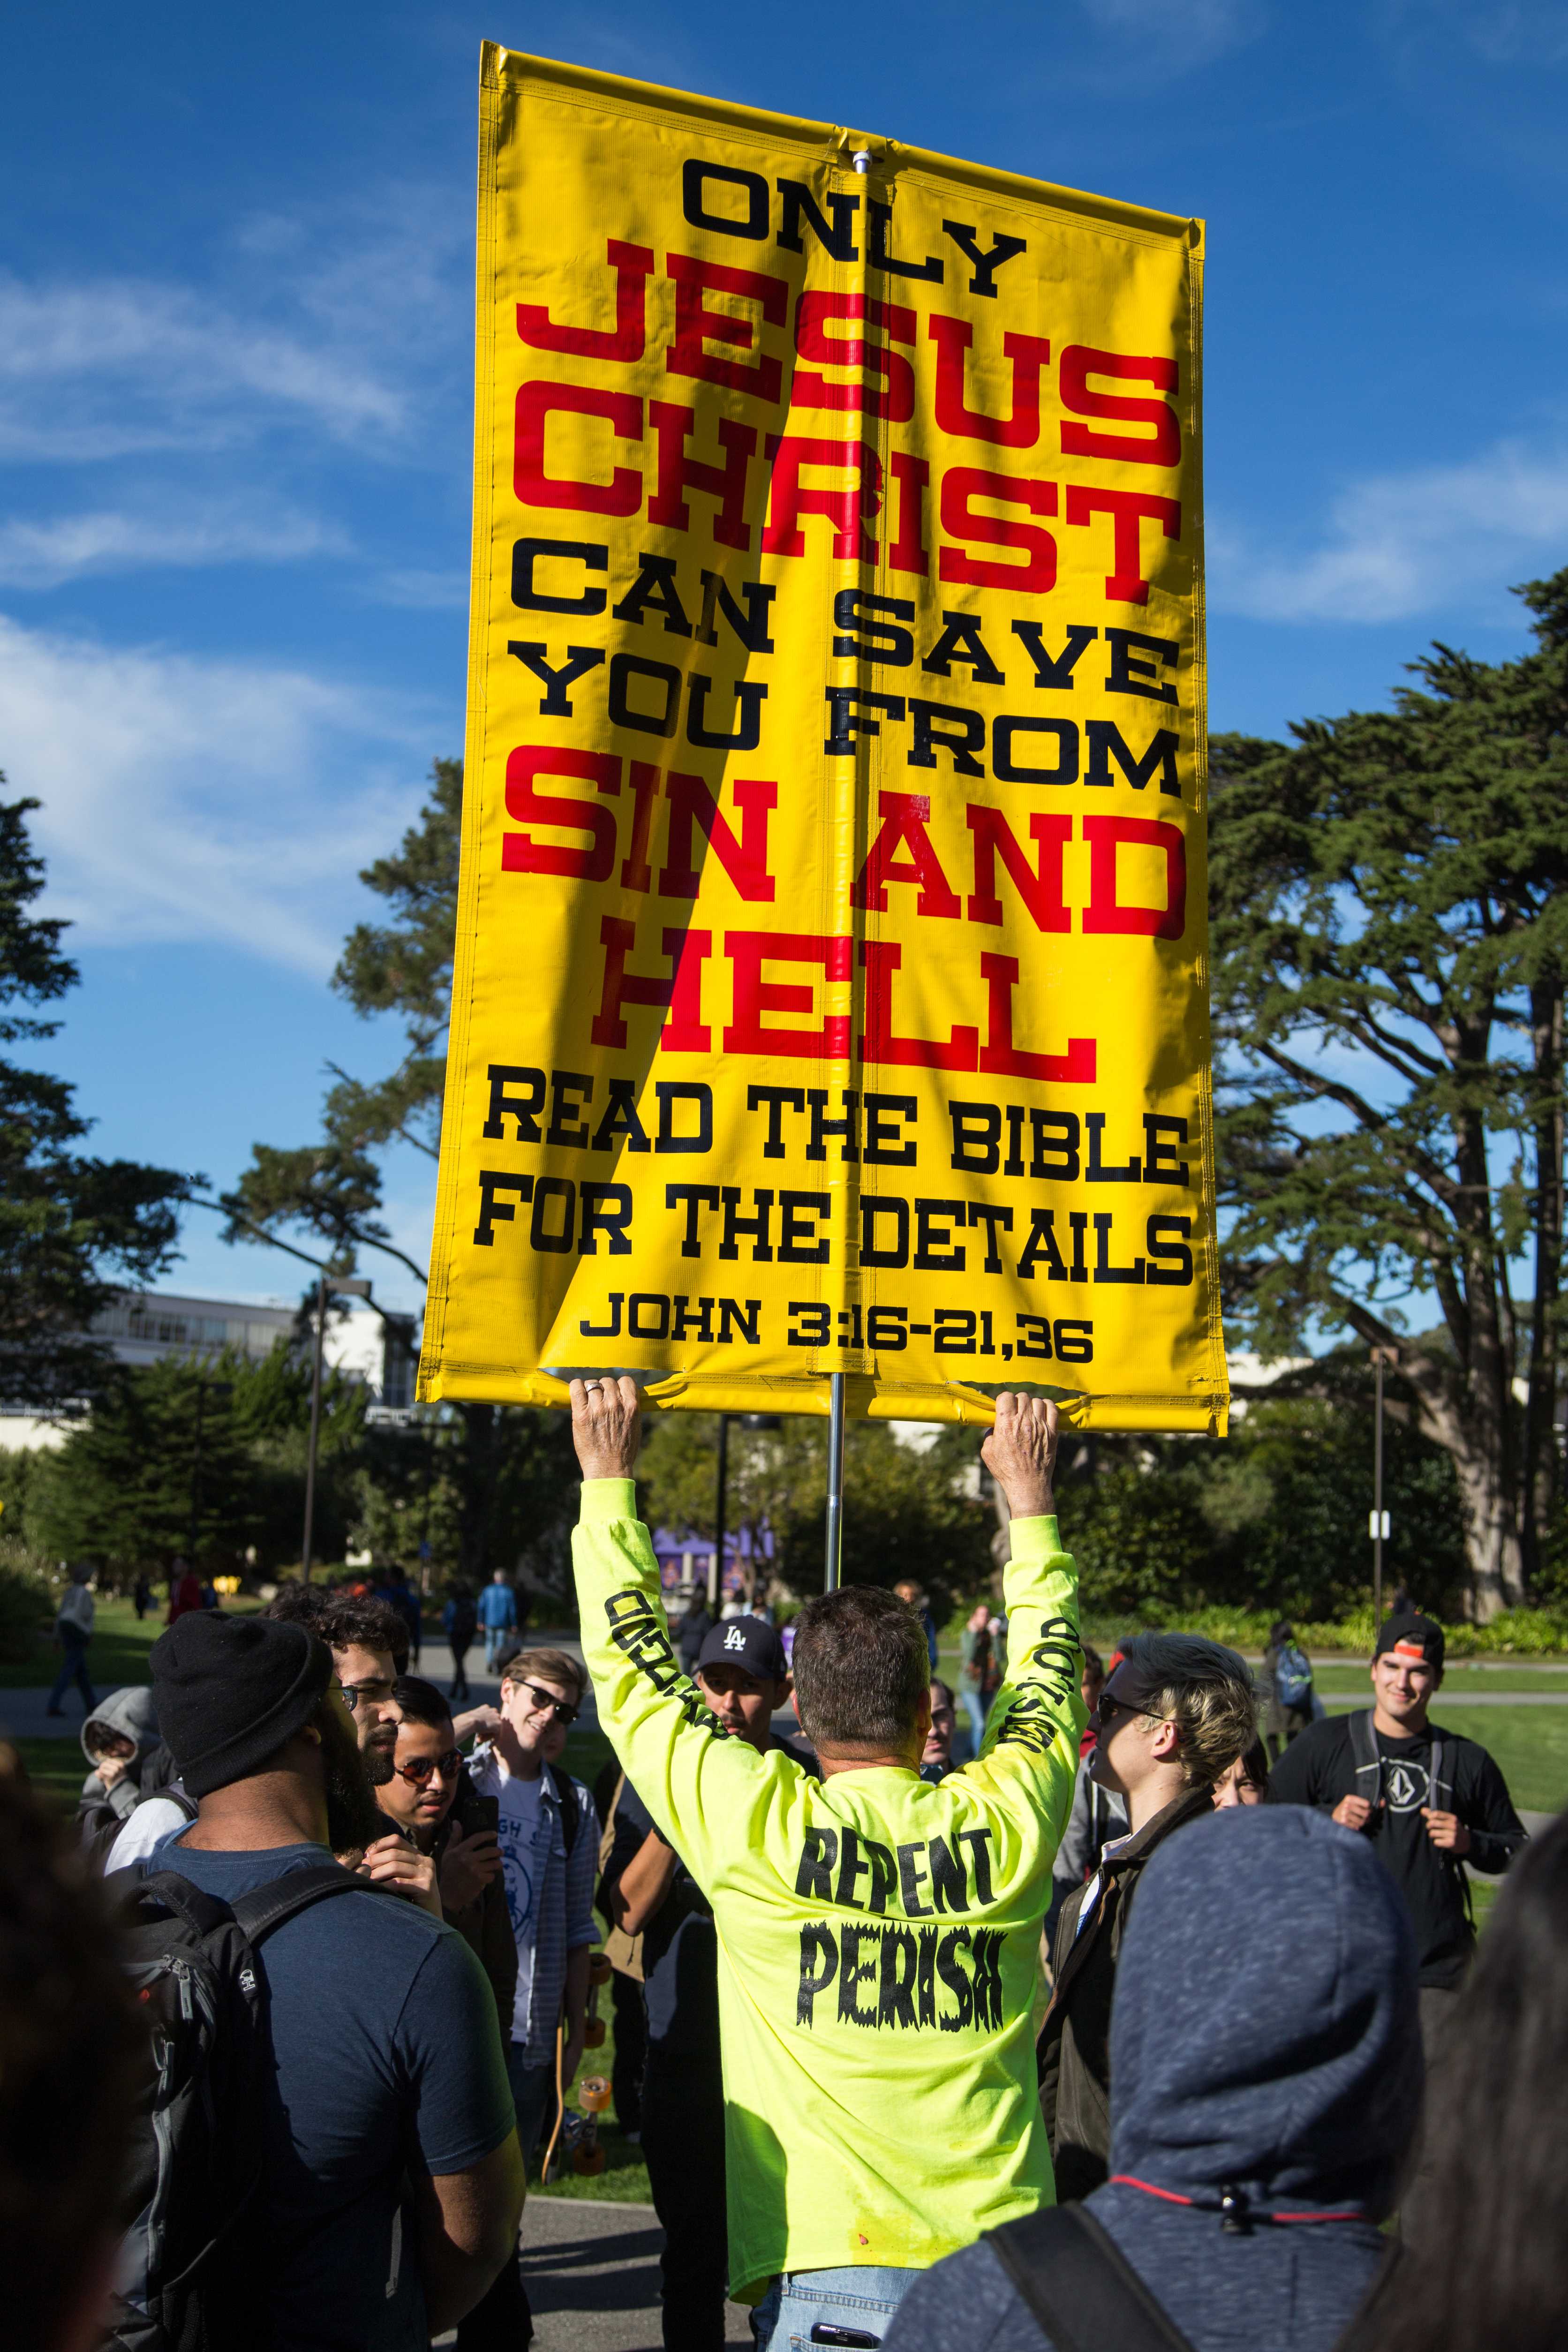 Students+clash+with+religious+activists+at+SF+State